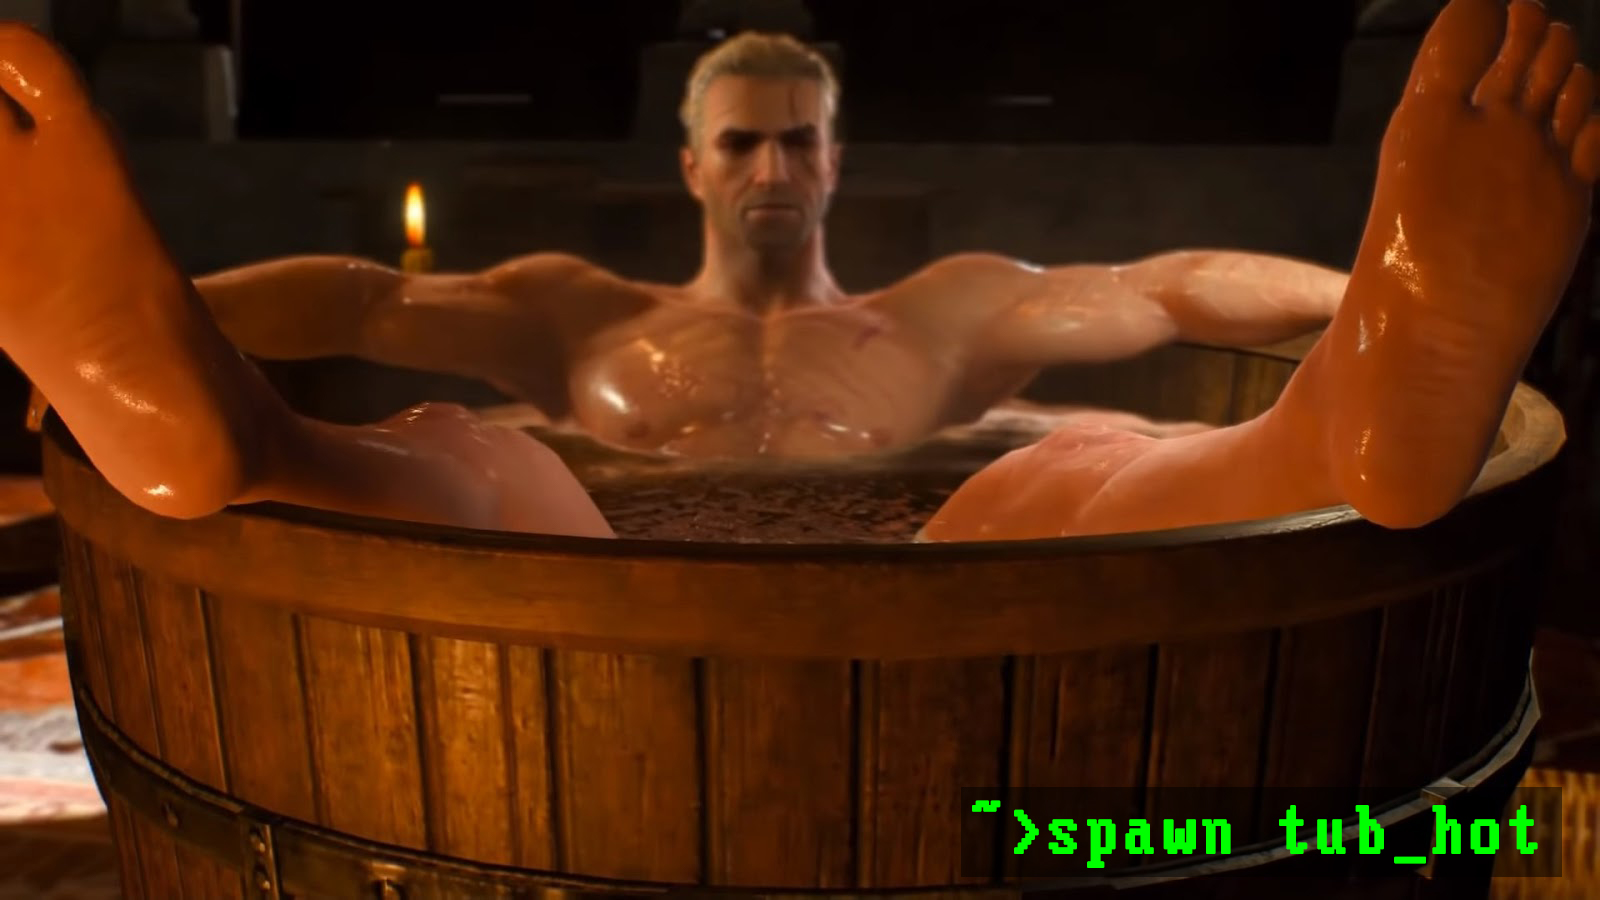 cheat codes for witcher 3 pc